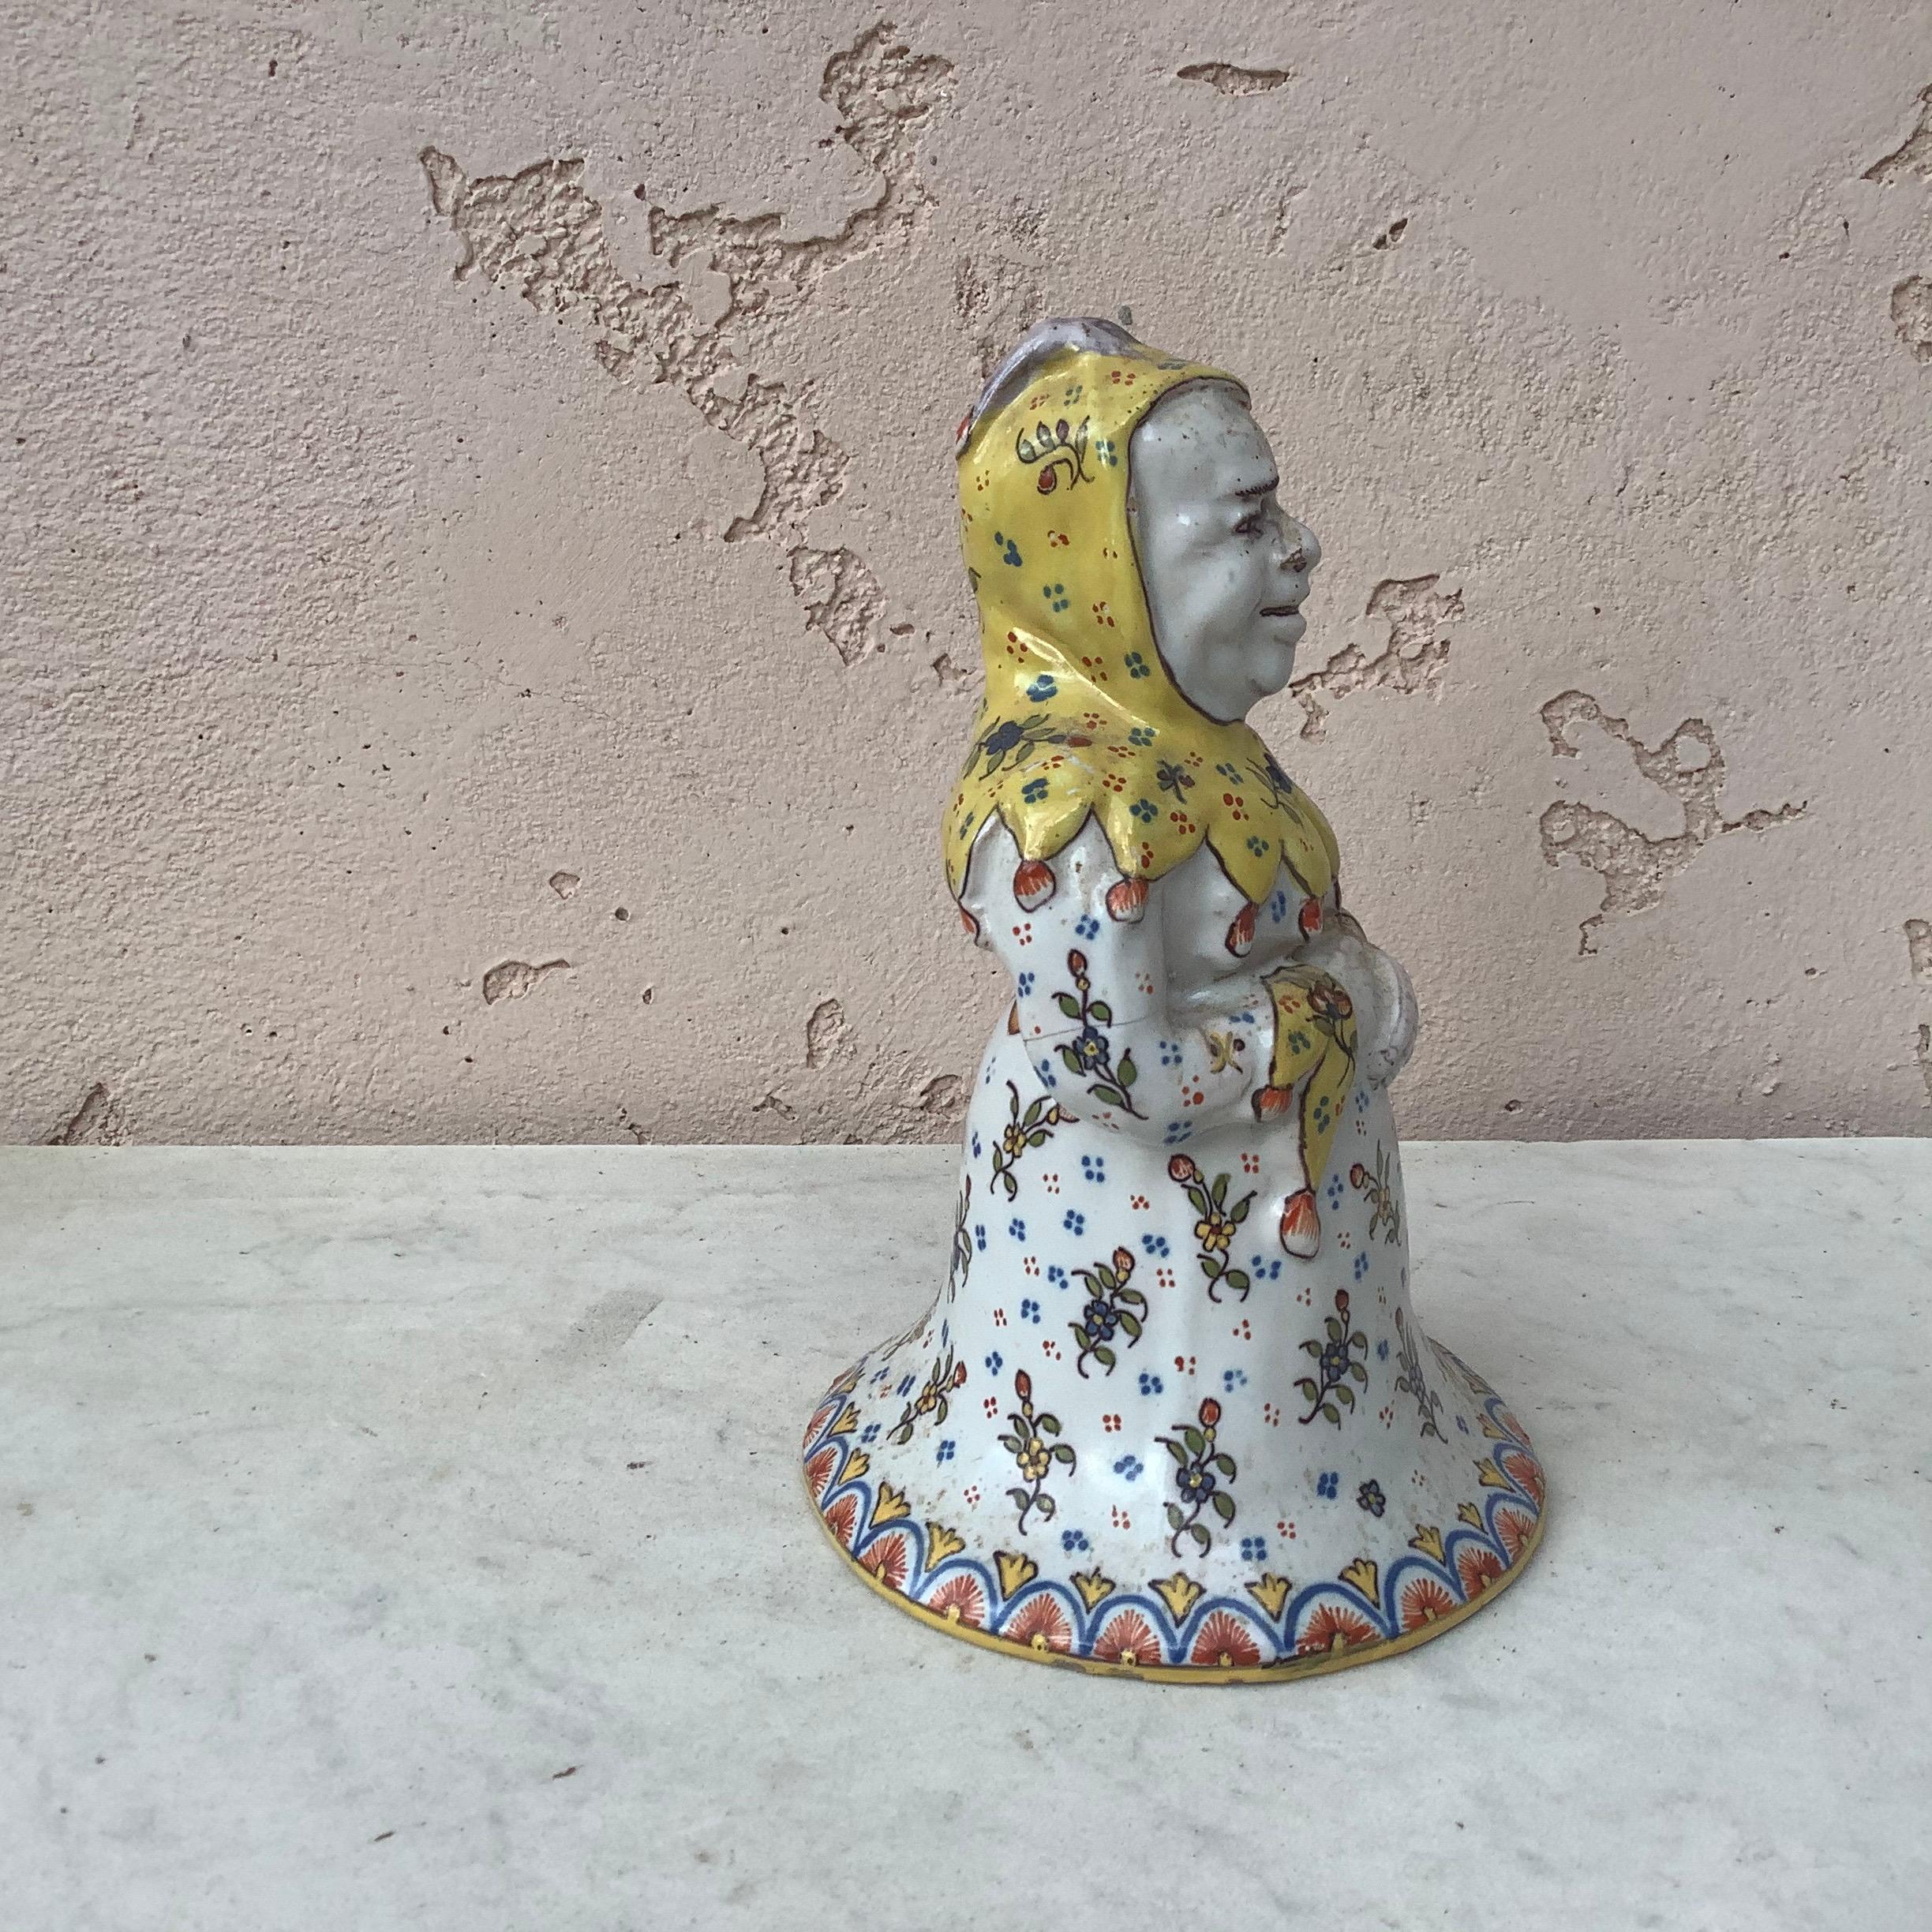 Rare French large Faience Jester bell signed Fourmaintraux Desvres, circa 1890.